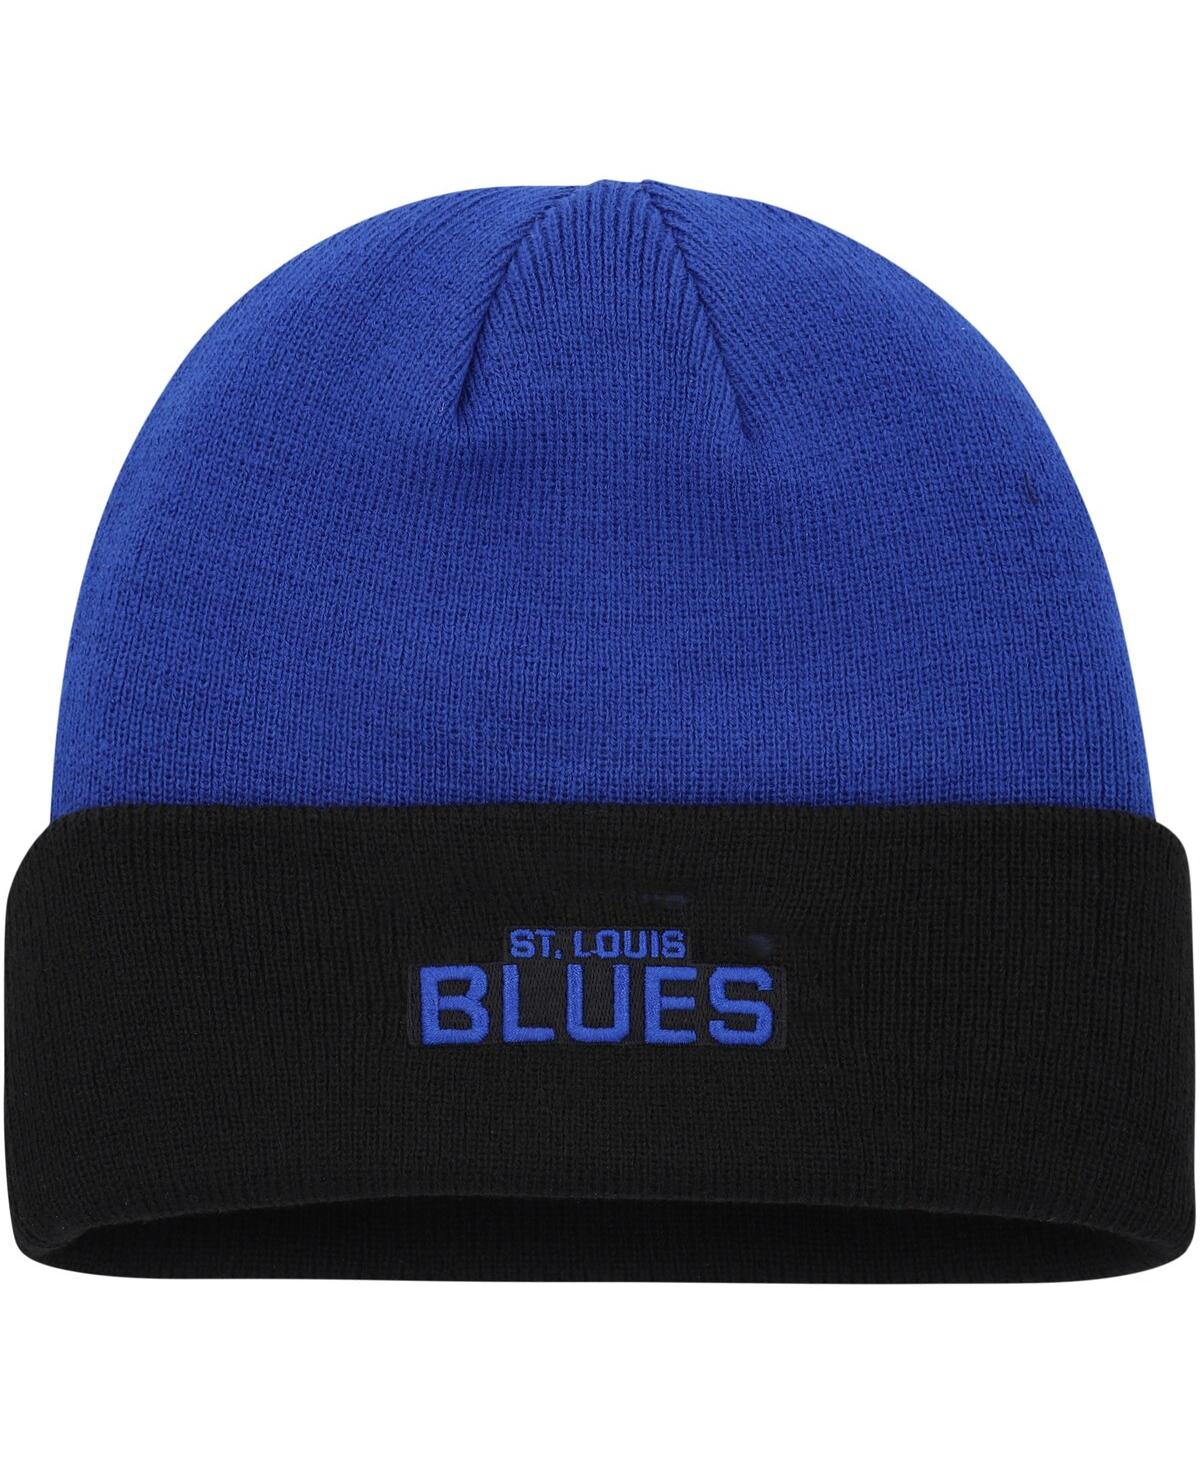 Shop Outerstuff Youth Boys And Girls Blue, Black St. Louis Blues Logo Outline Cuffed Knit Hat In Blue,black